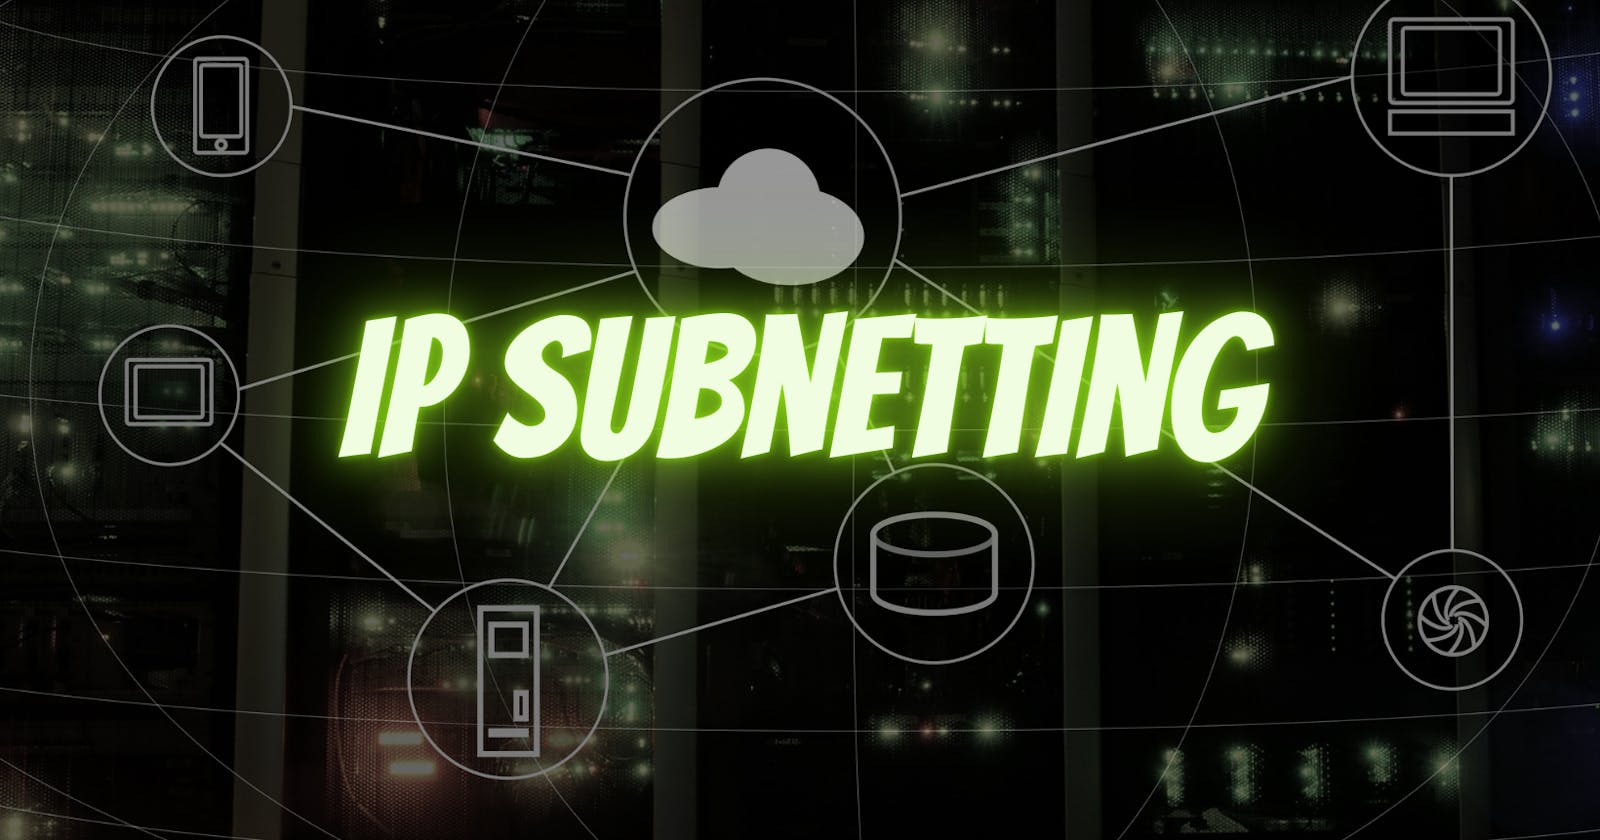 How to -- IP subnetting